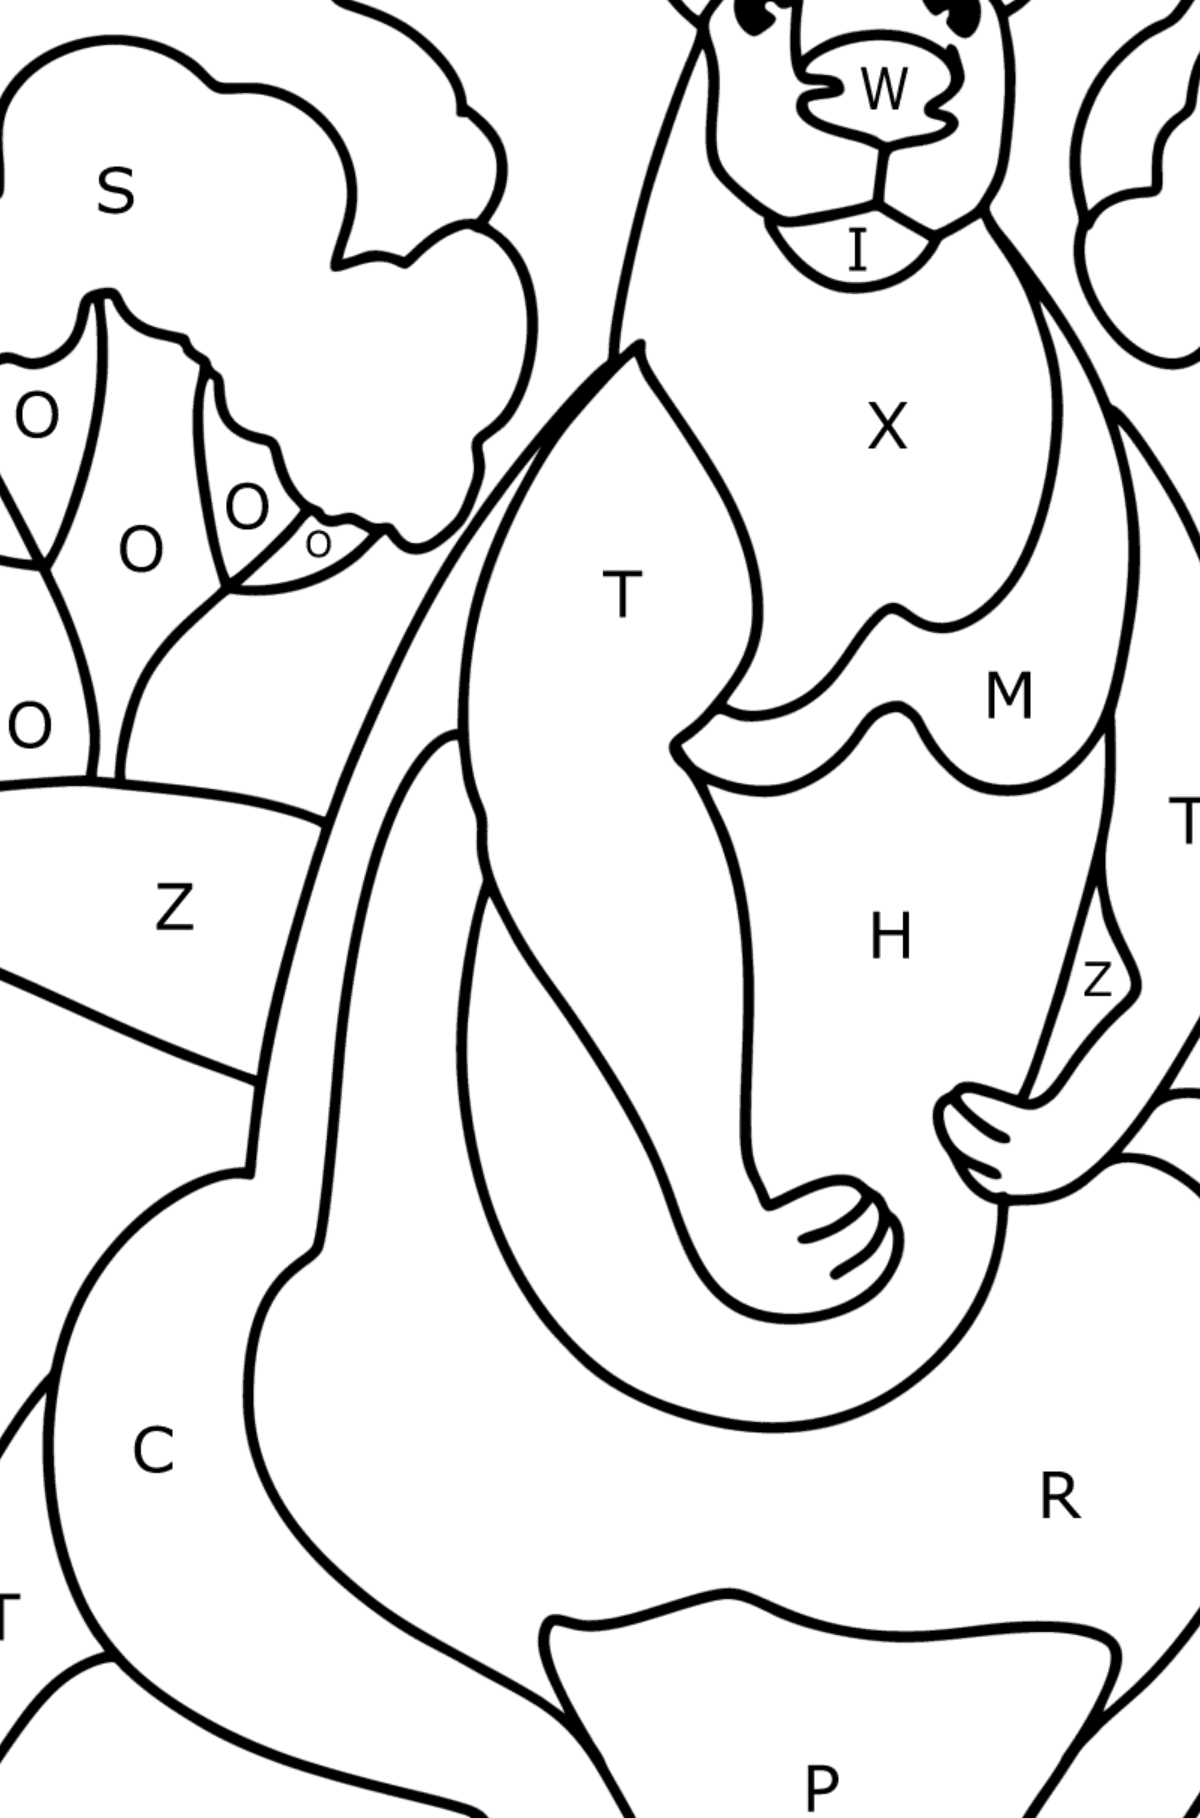 Giant Kangaroo coloring page - Coloring by Letters for Kids